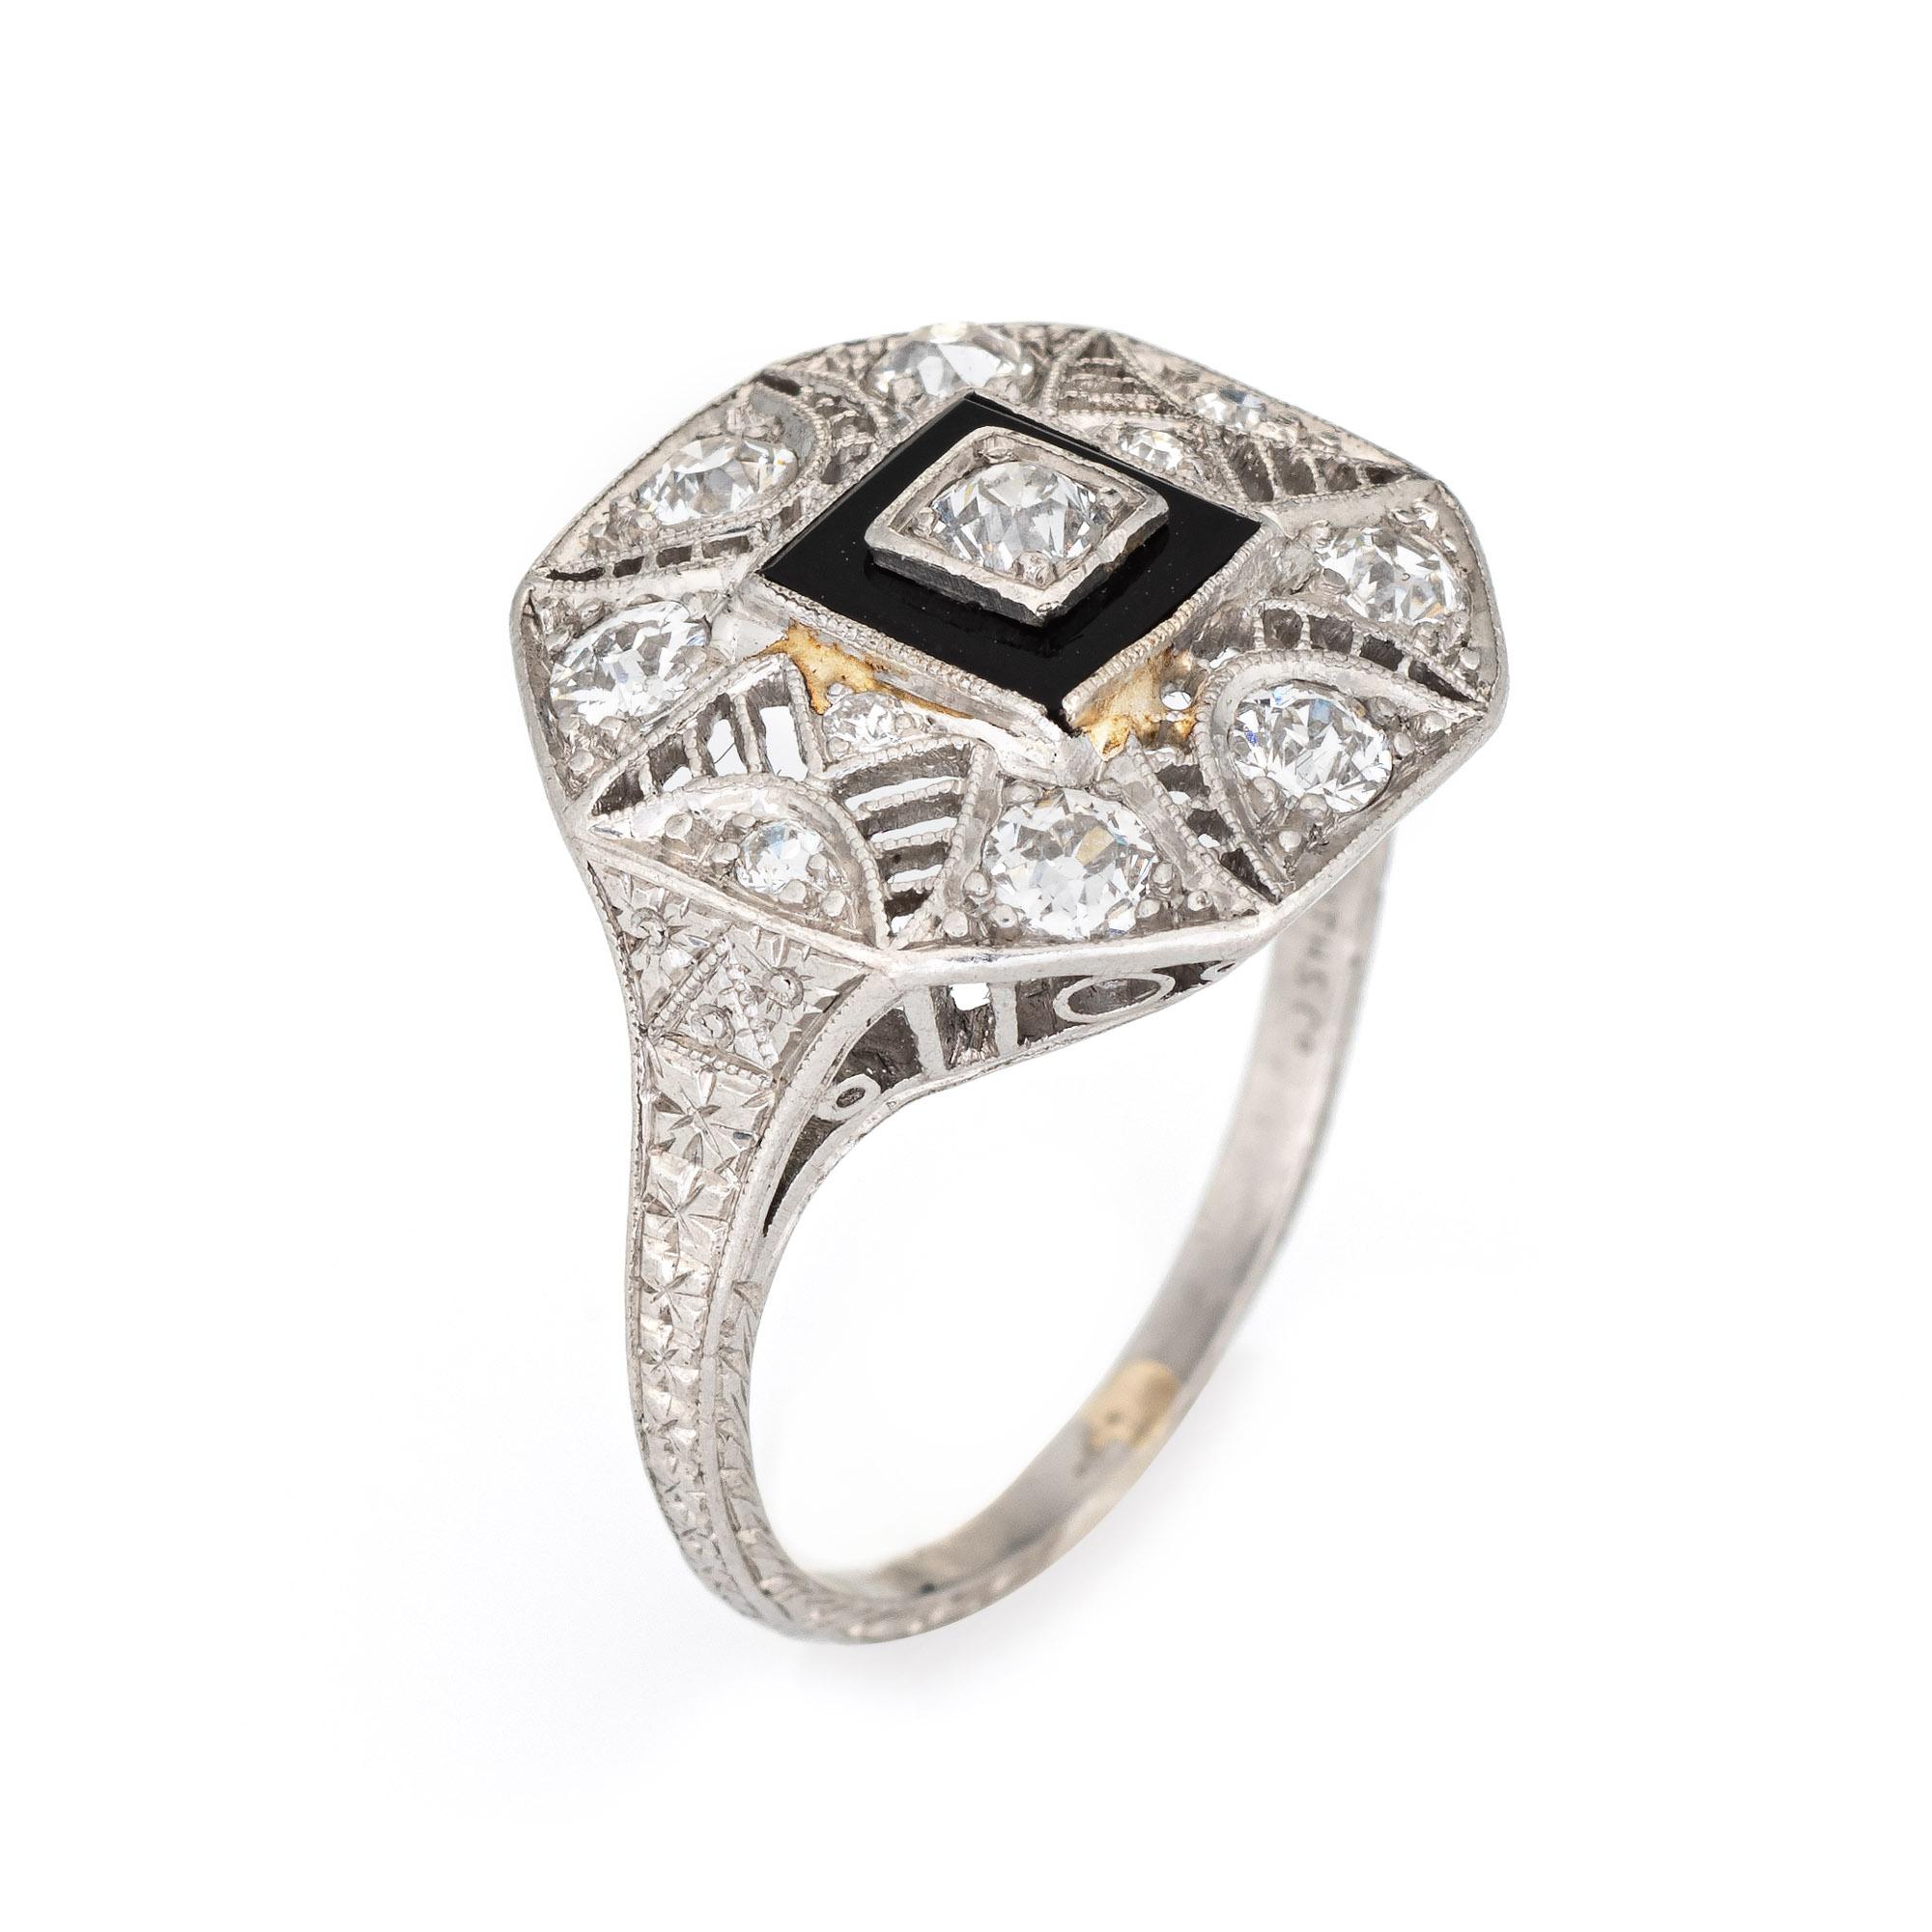 Elegant & finely detailed Art Deco era ring (circa 1920s to 1930s) crafted in 900 platinum. 

Old mine and single cut diamonds total an estimated 0.75 carats (estimated at H-I color and VS2-SI1 clarity).     

The ring epitomizes vintage charm and